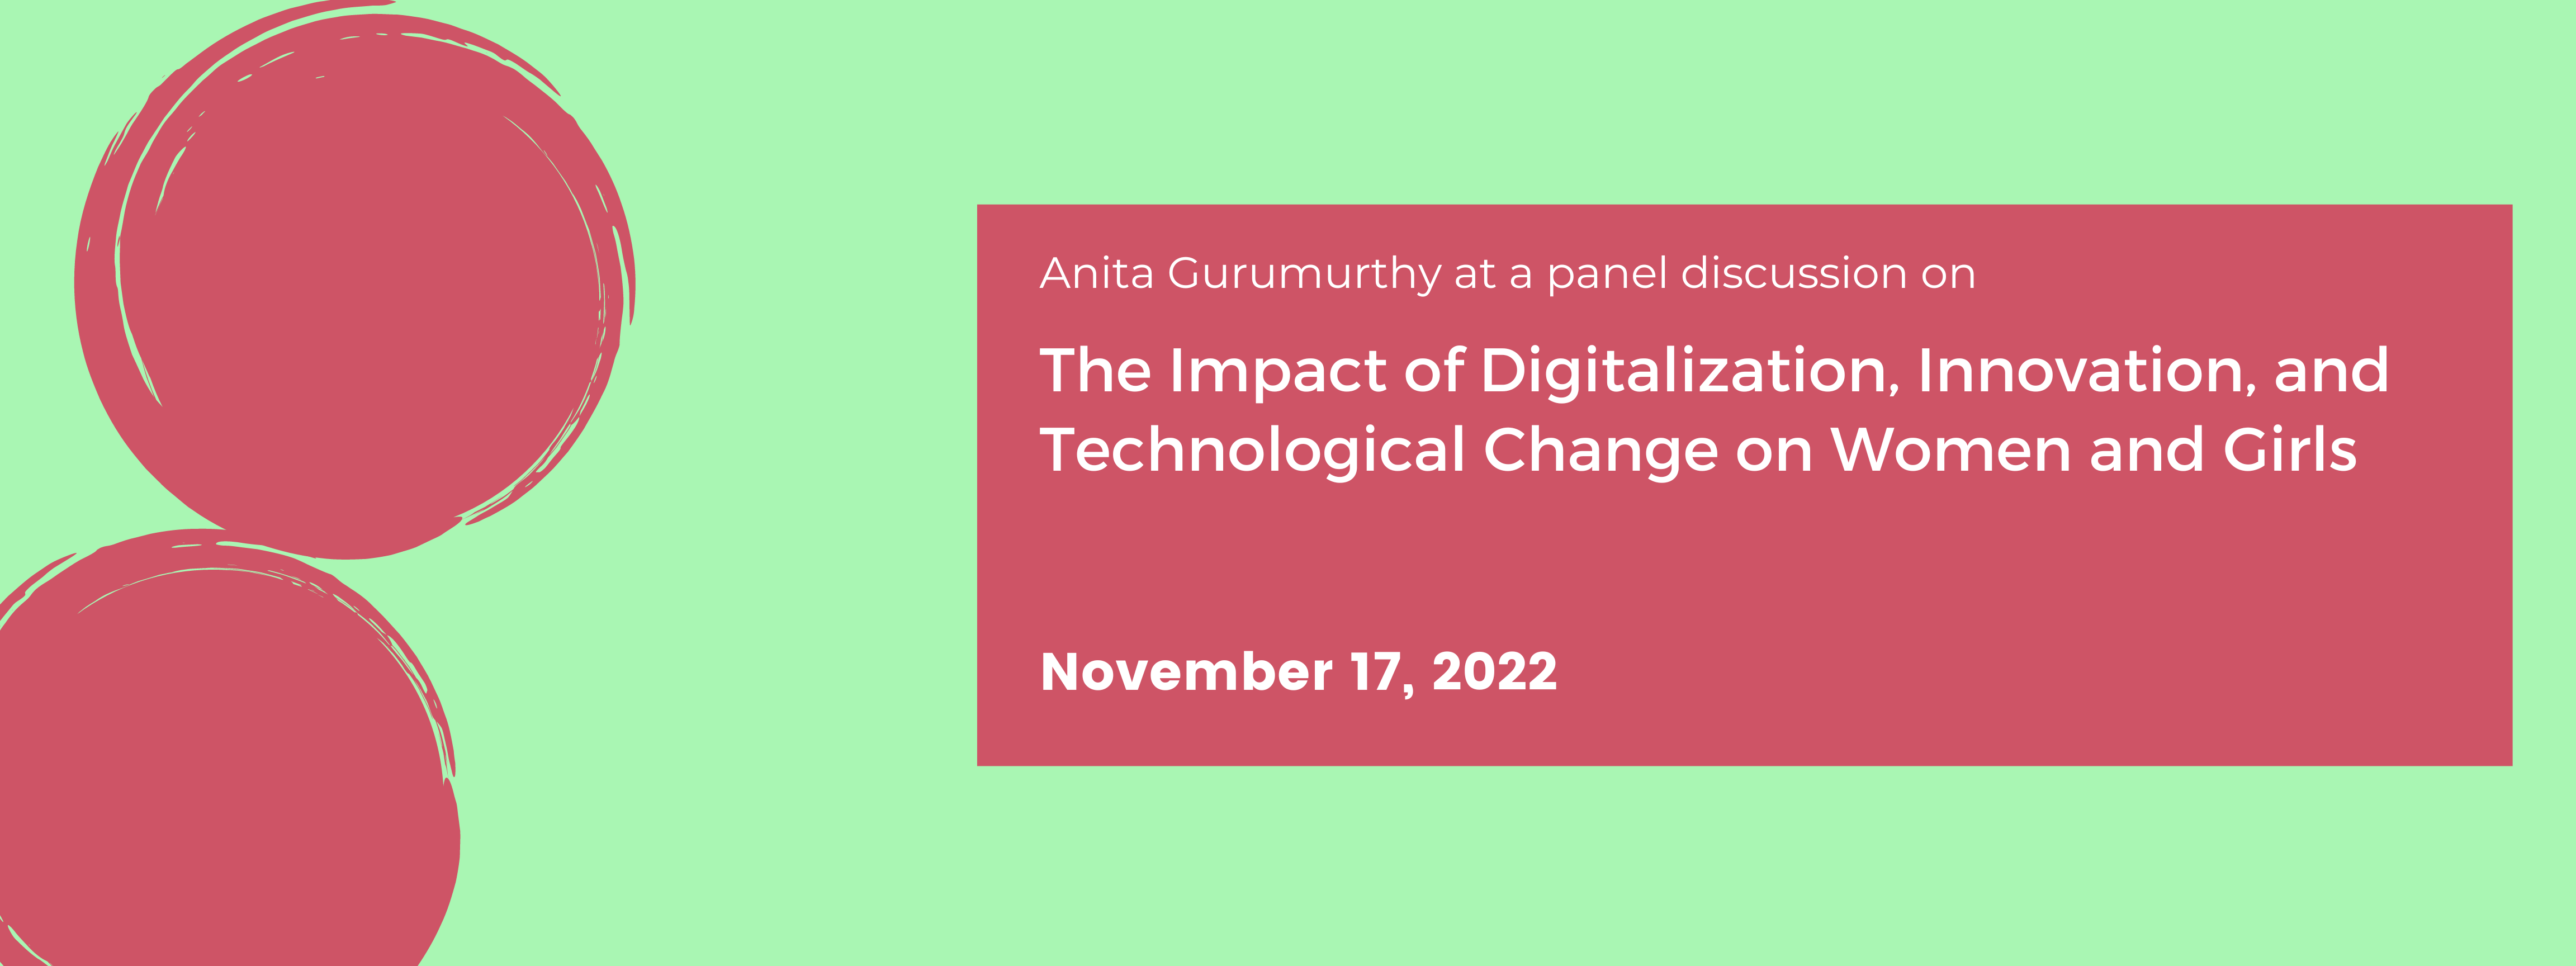 The Impact of Digitalization, Innovation, and Technological Change on Women and Girls